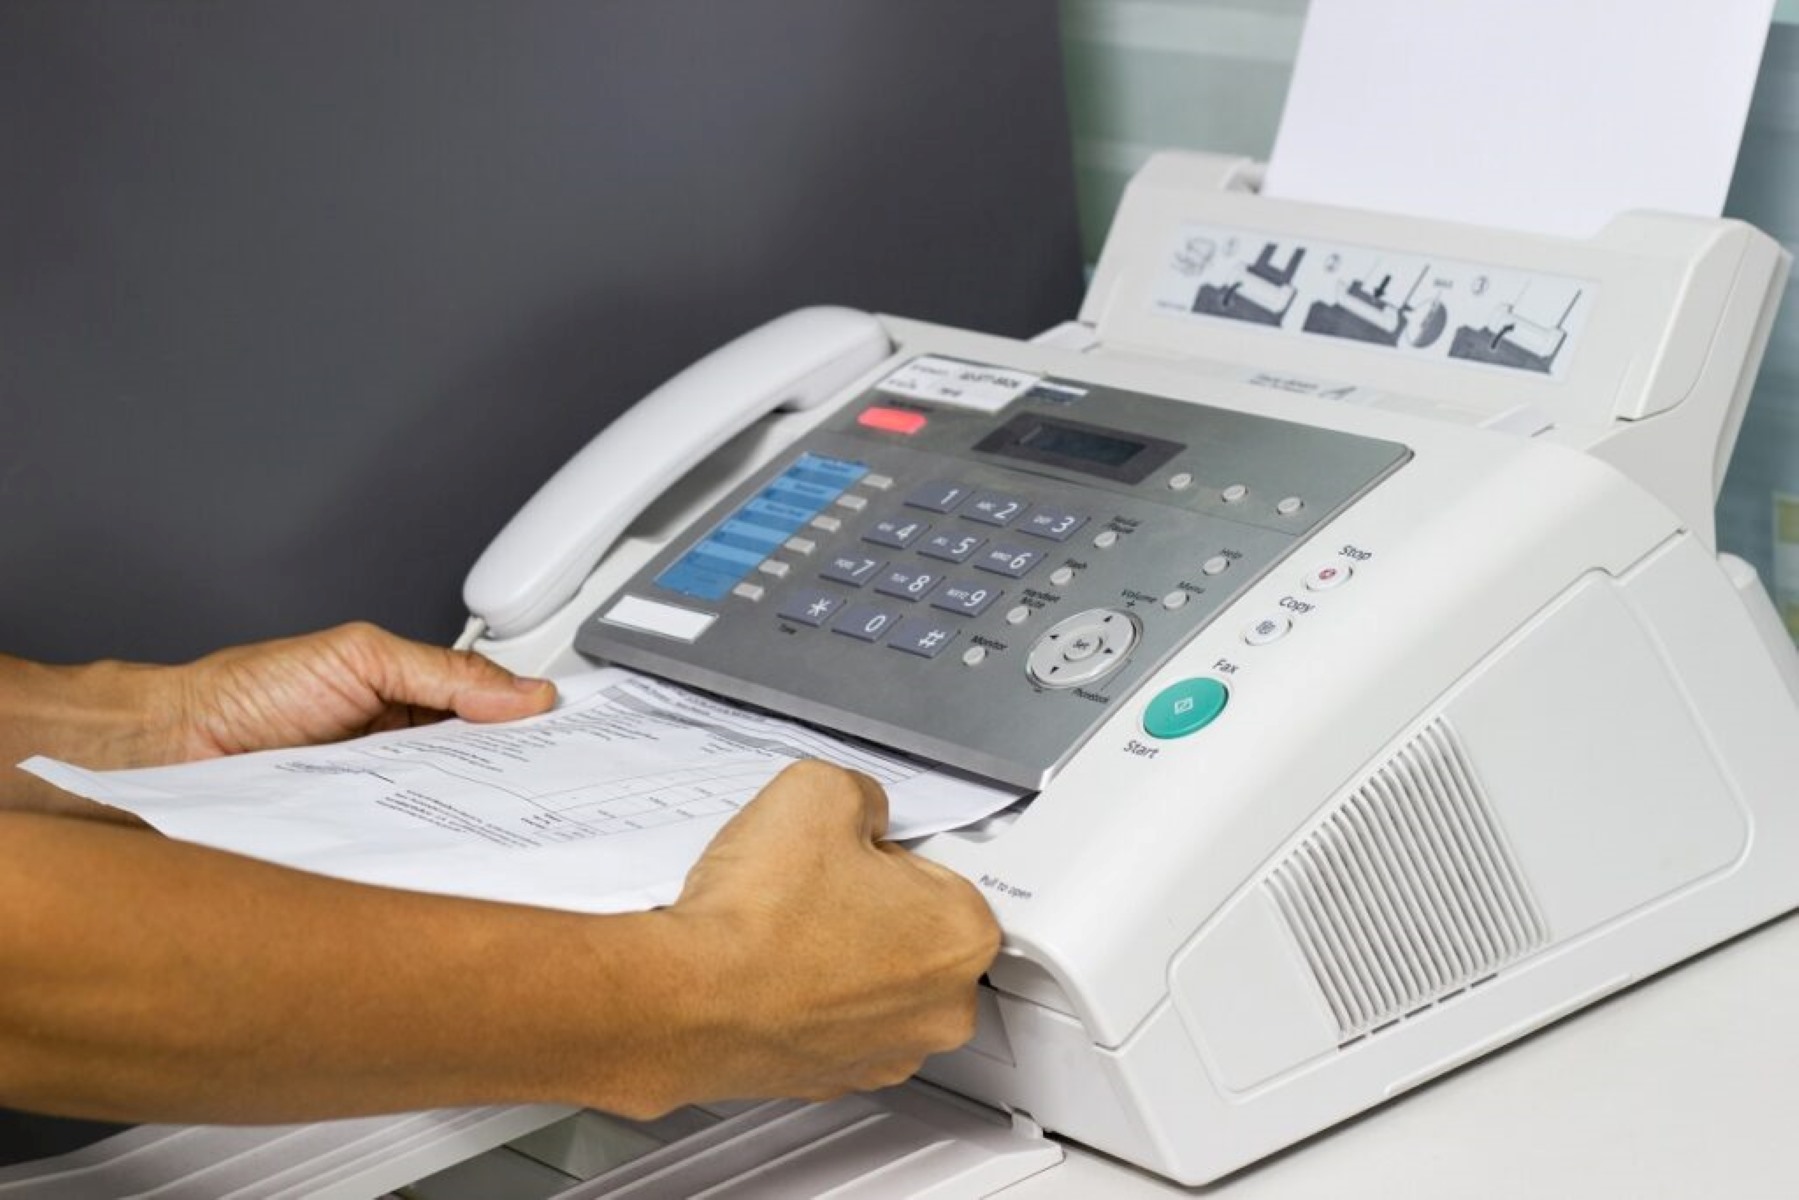 What Does Fax Mean On A Printer